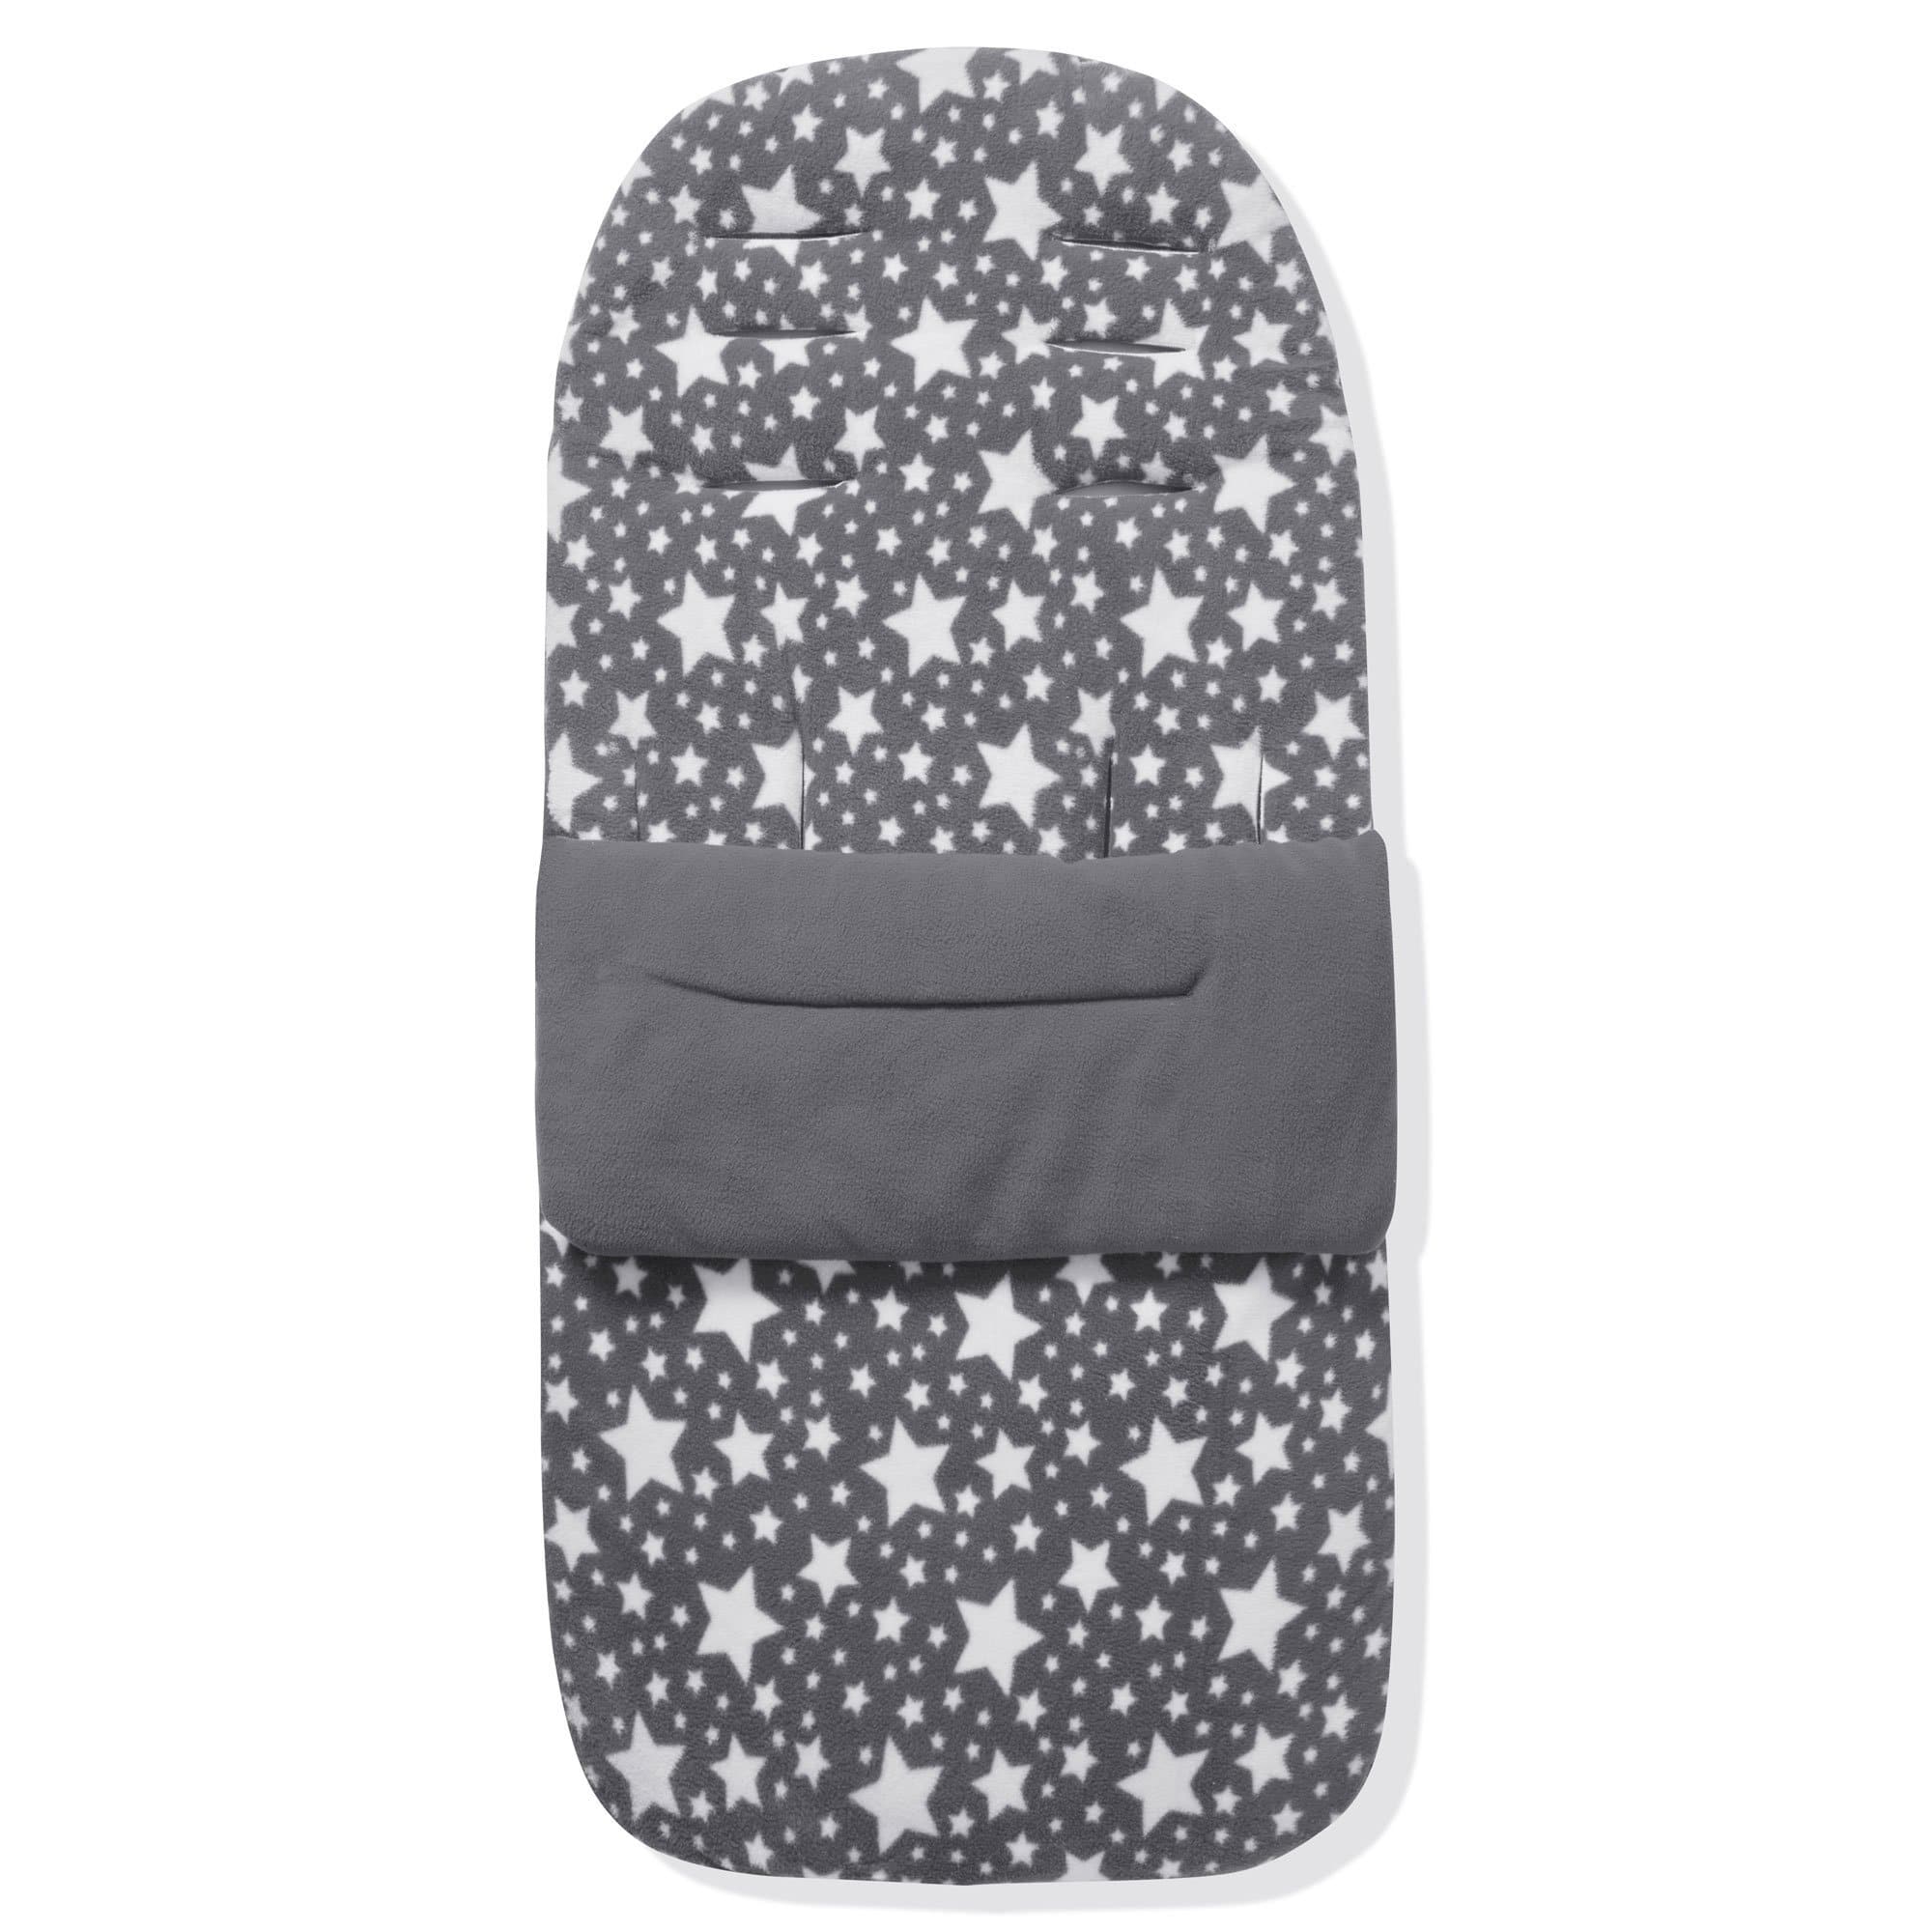 Fleece Footmuff / Cosy Toes Compatible with Emmaljunga - Grey Star / Fits All Models | For Your Little One